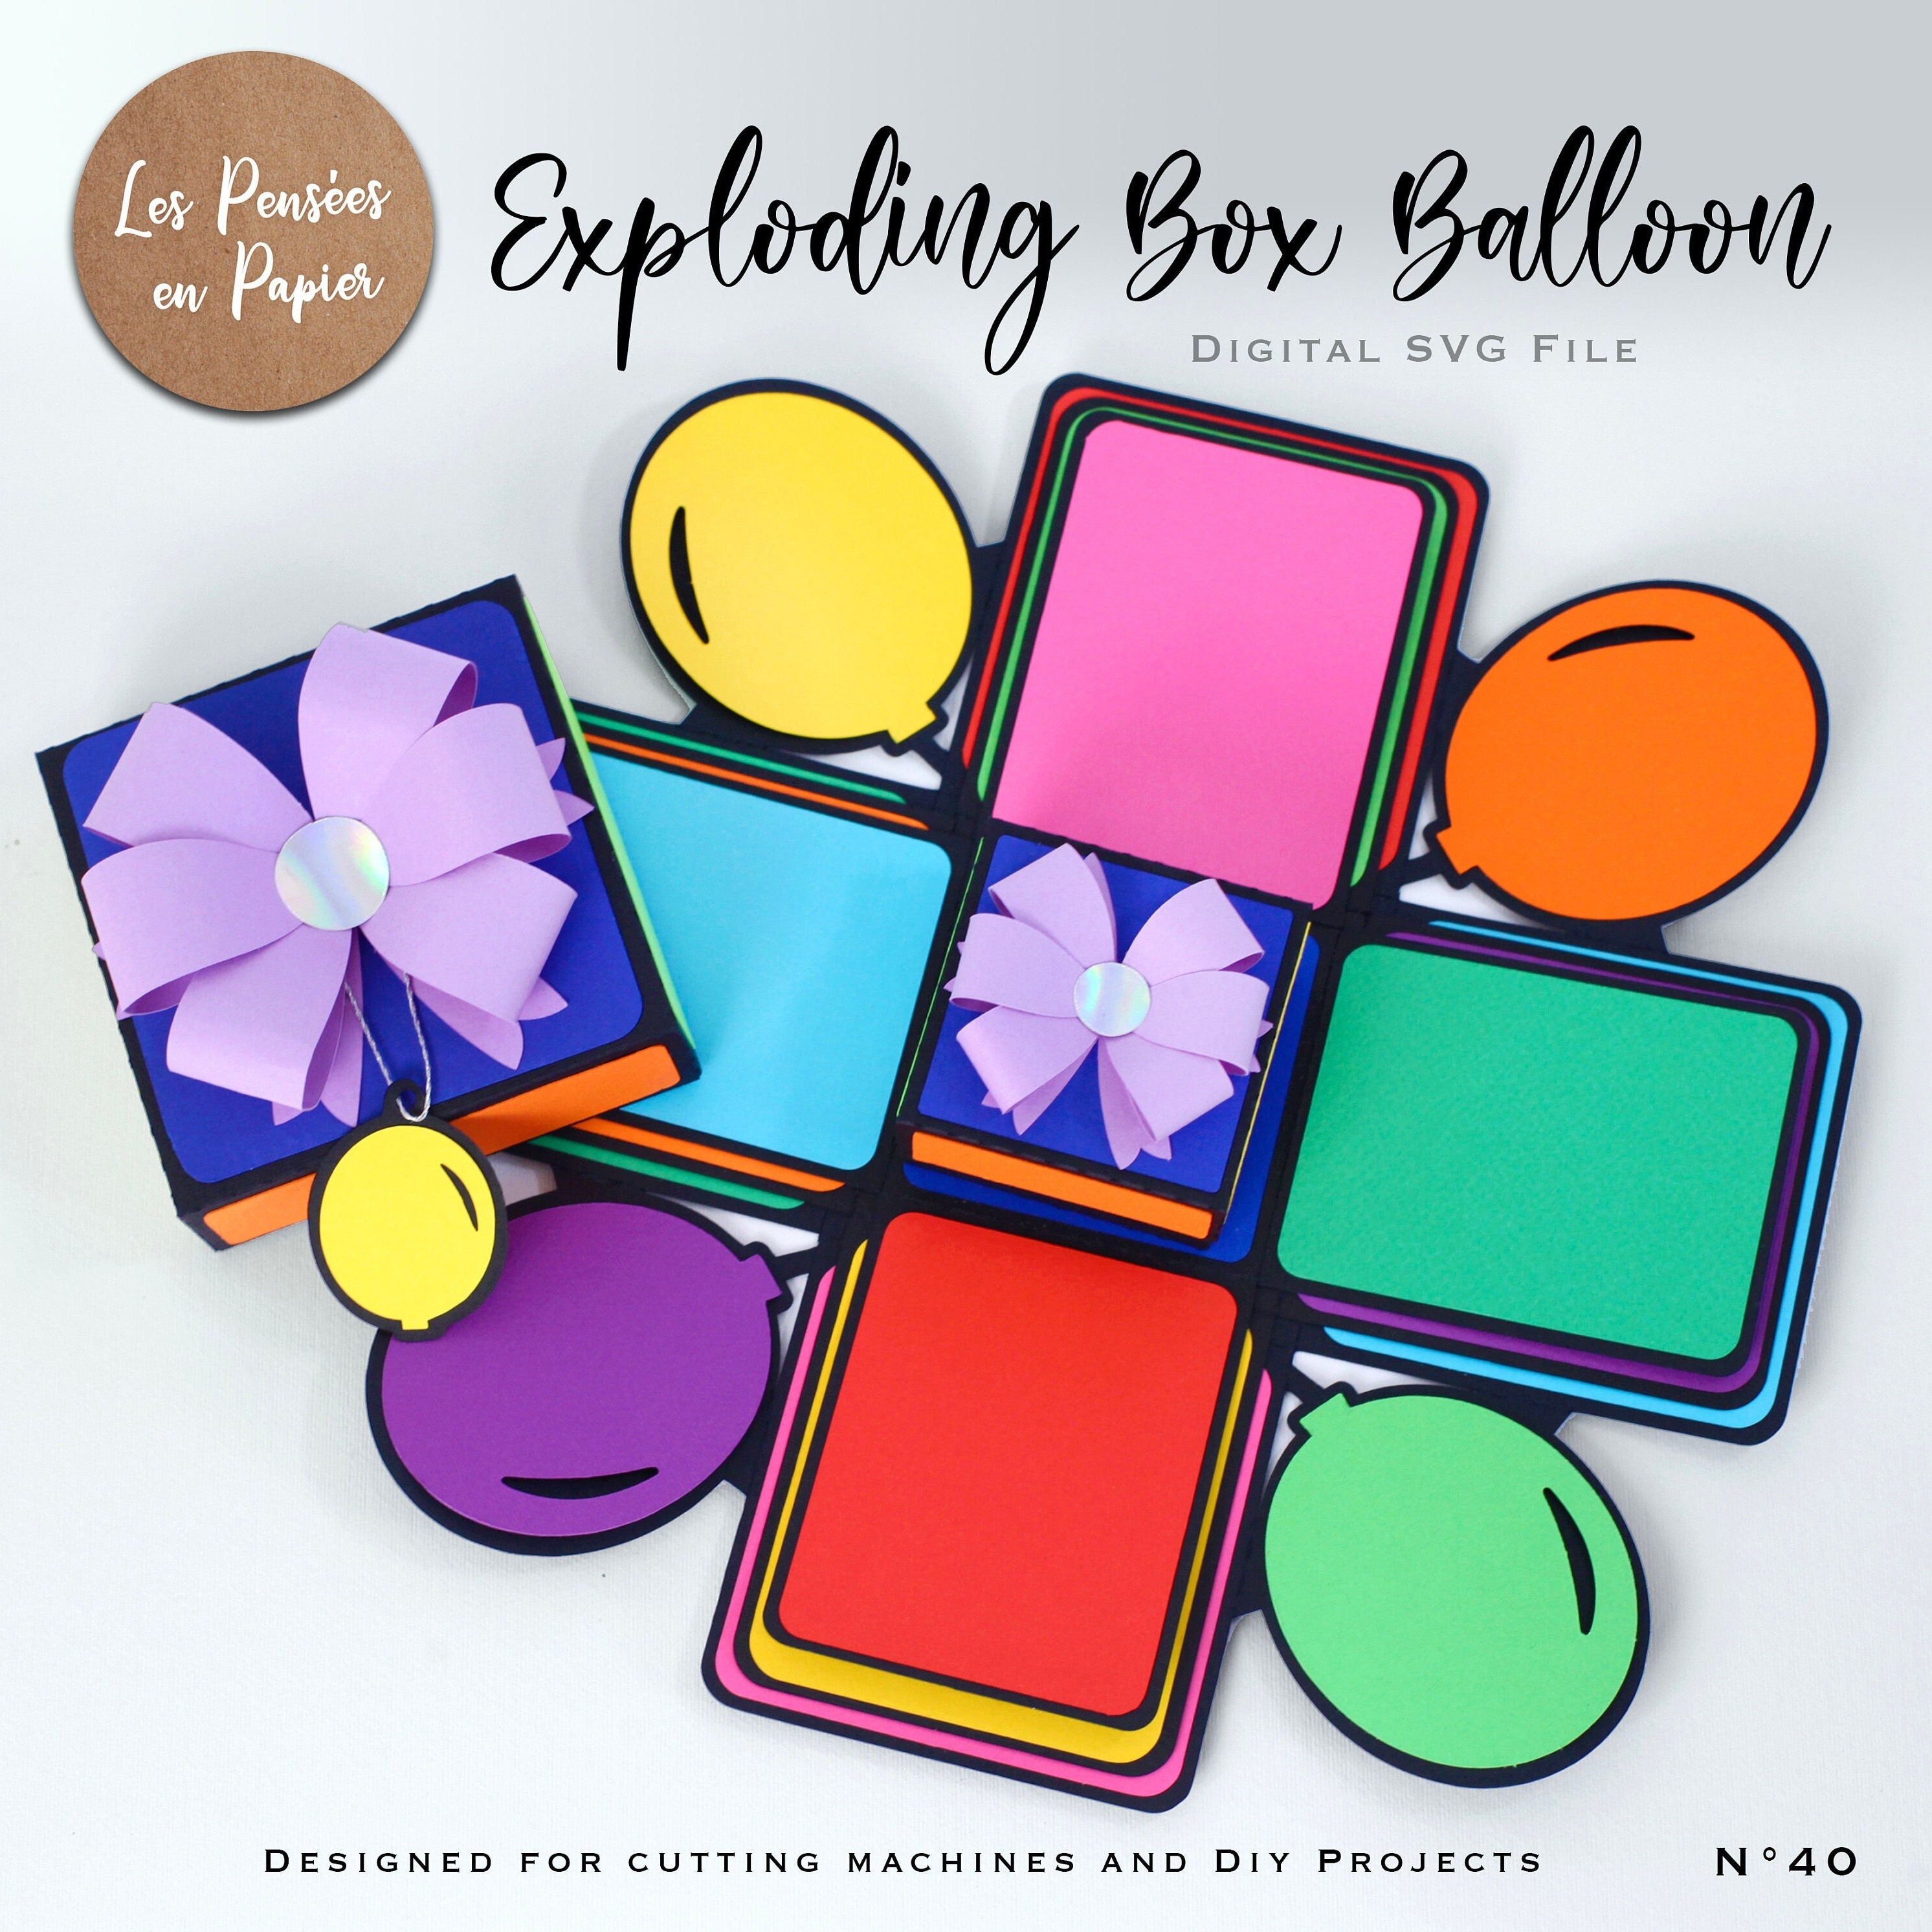 DIY Balloon Sizer Template and Instructions DIGITAL DOWNLOAD 